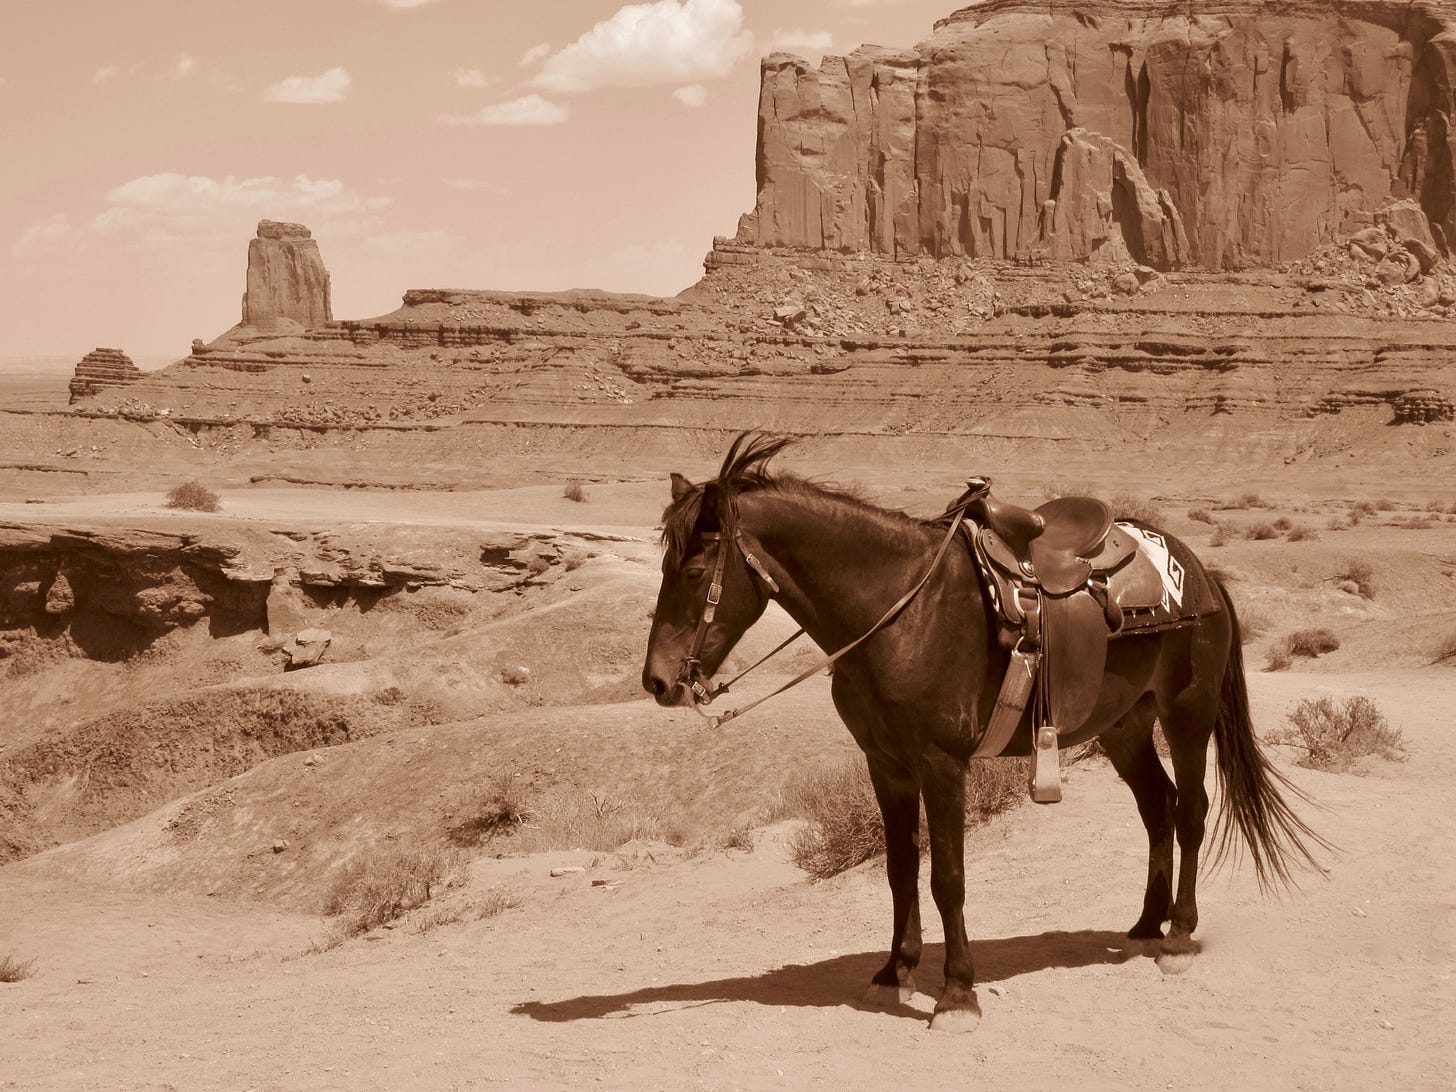 A saddled pony stands in the desert with rocks in the background.